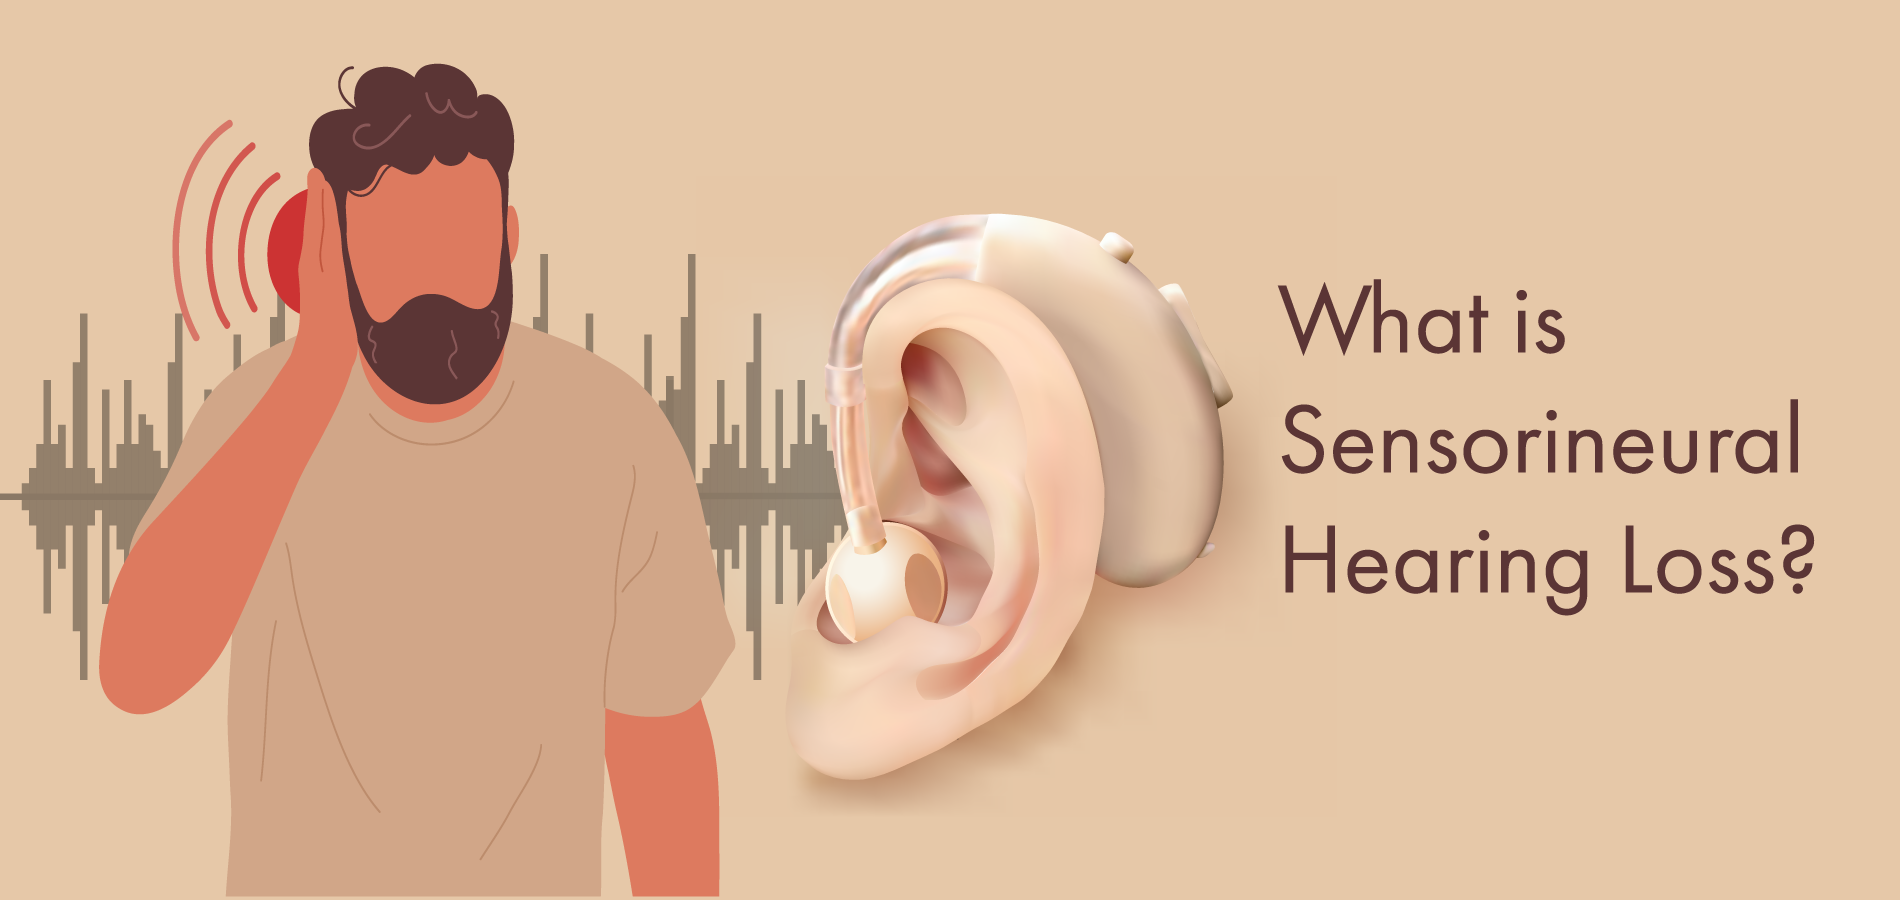 What is sensorineural hearing loss and how can it be treated?